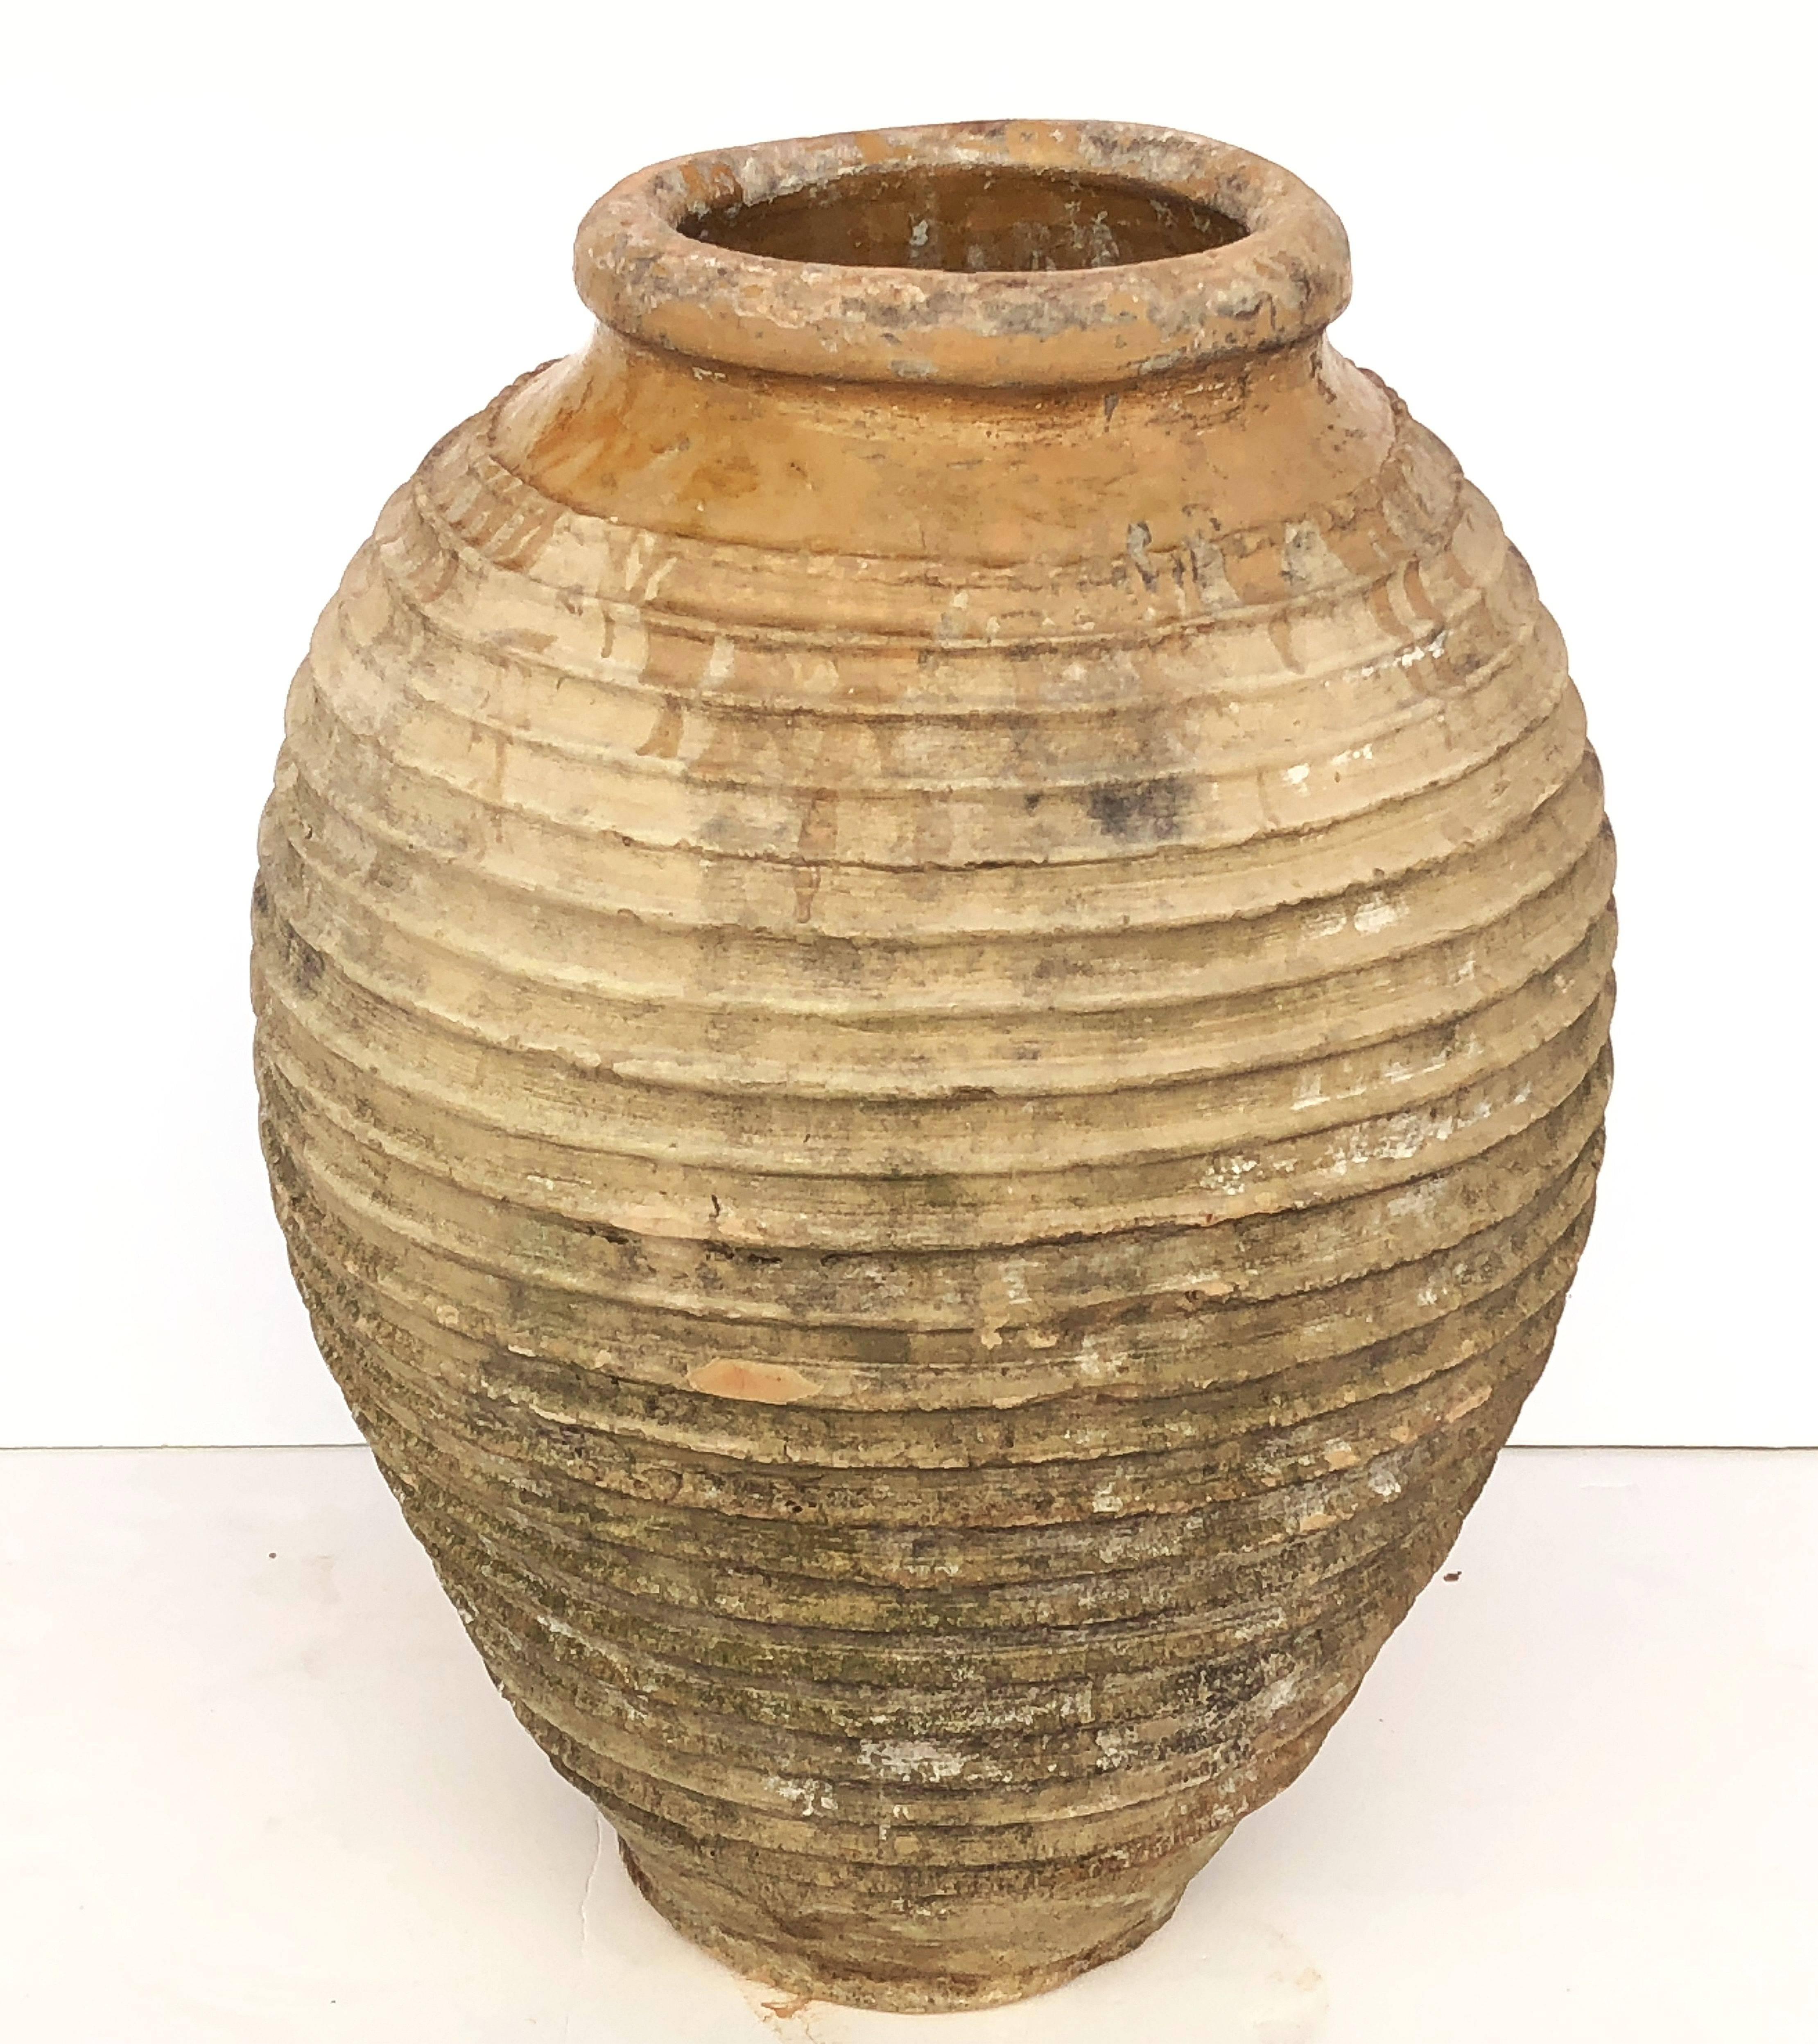 A handsome large Greek garden urn pot (amphora) or oil jar, featuring a glazed top over a ridged, cylindrical body and functional as a garden ornament or planter.

Other similarly-styled jars and pots available.

This pot's dimensions:

Height